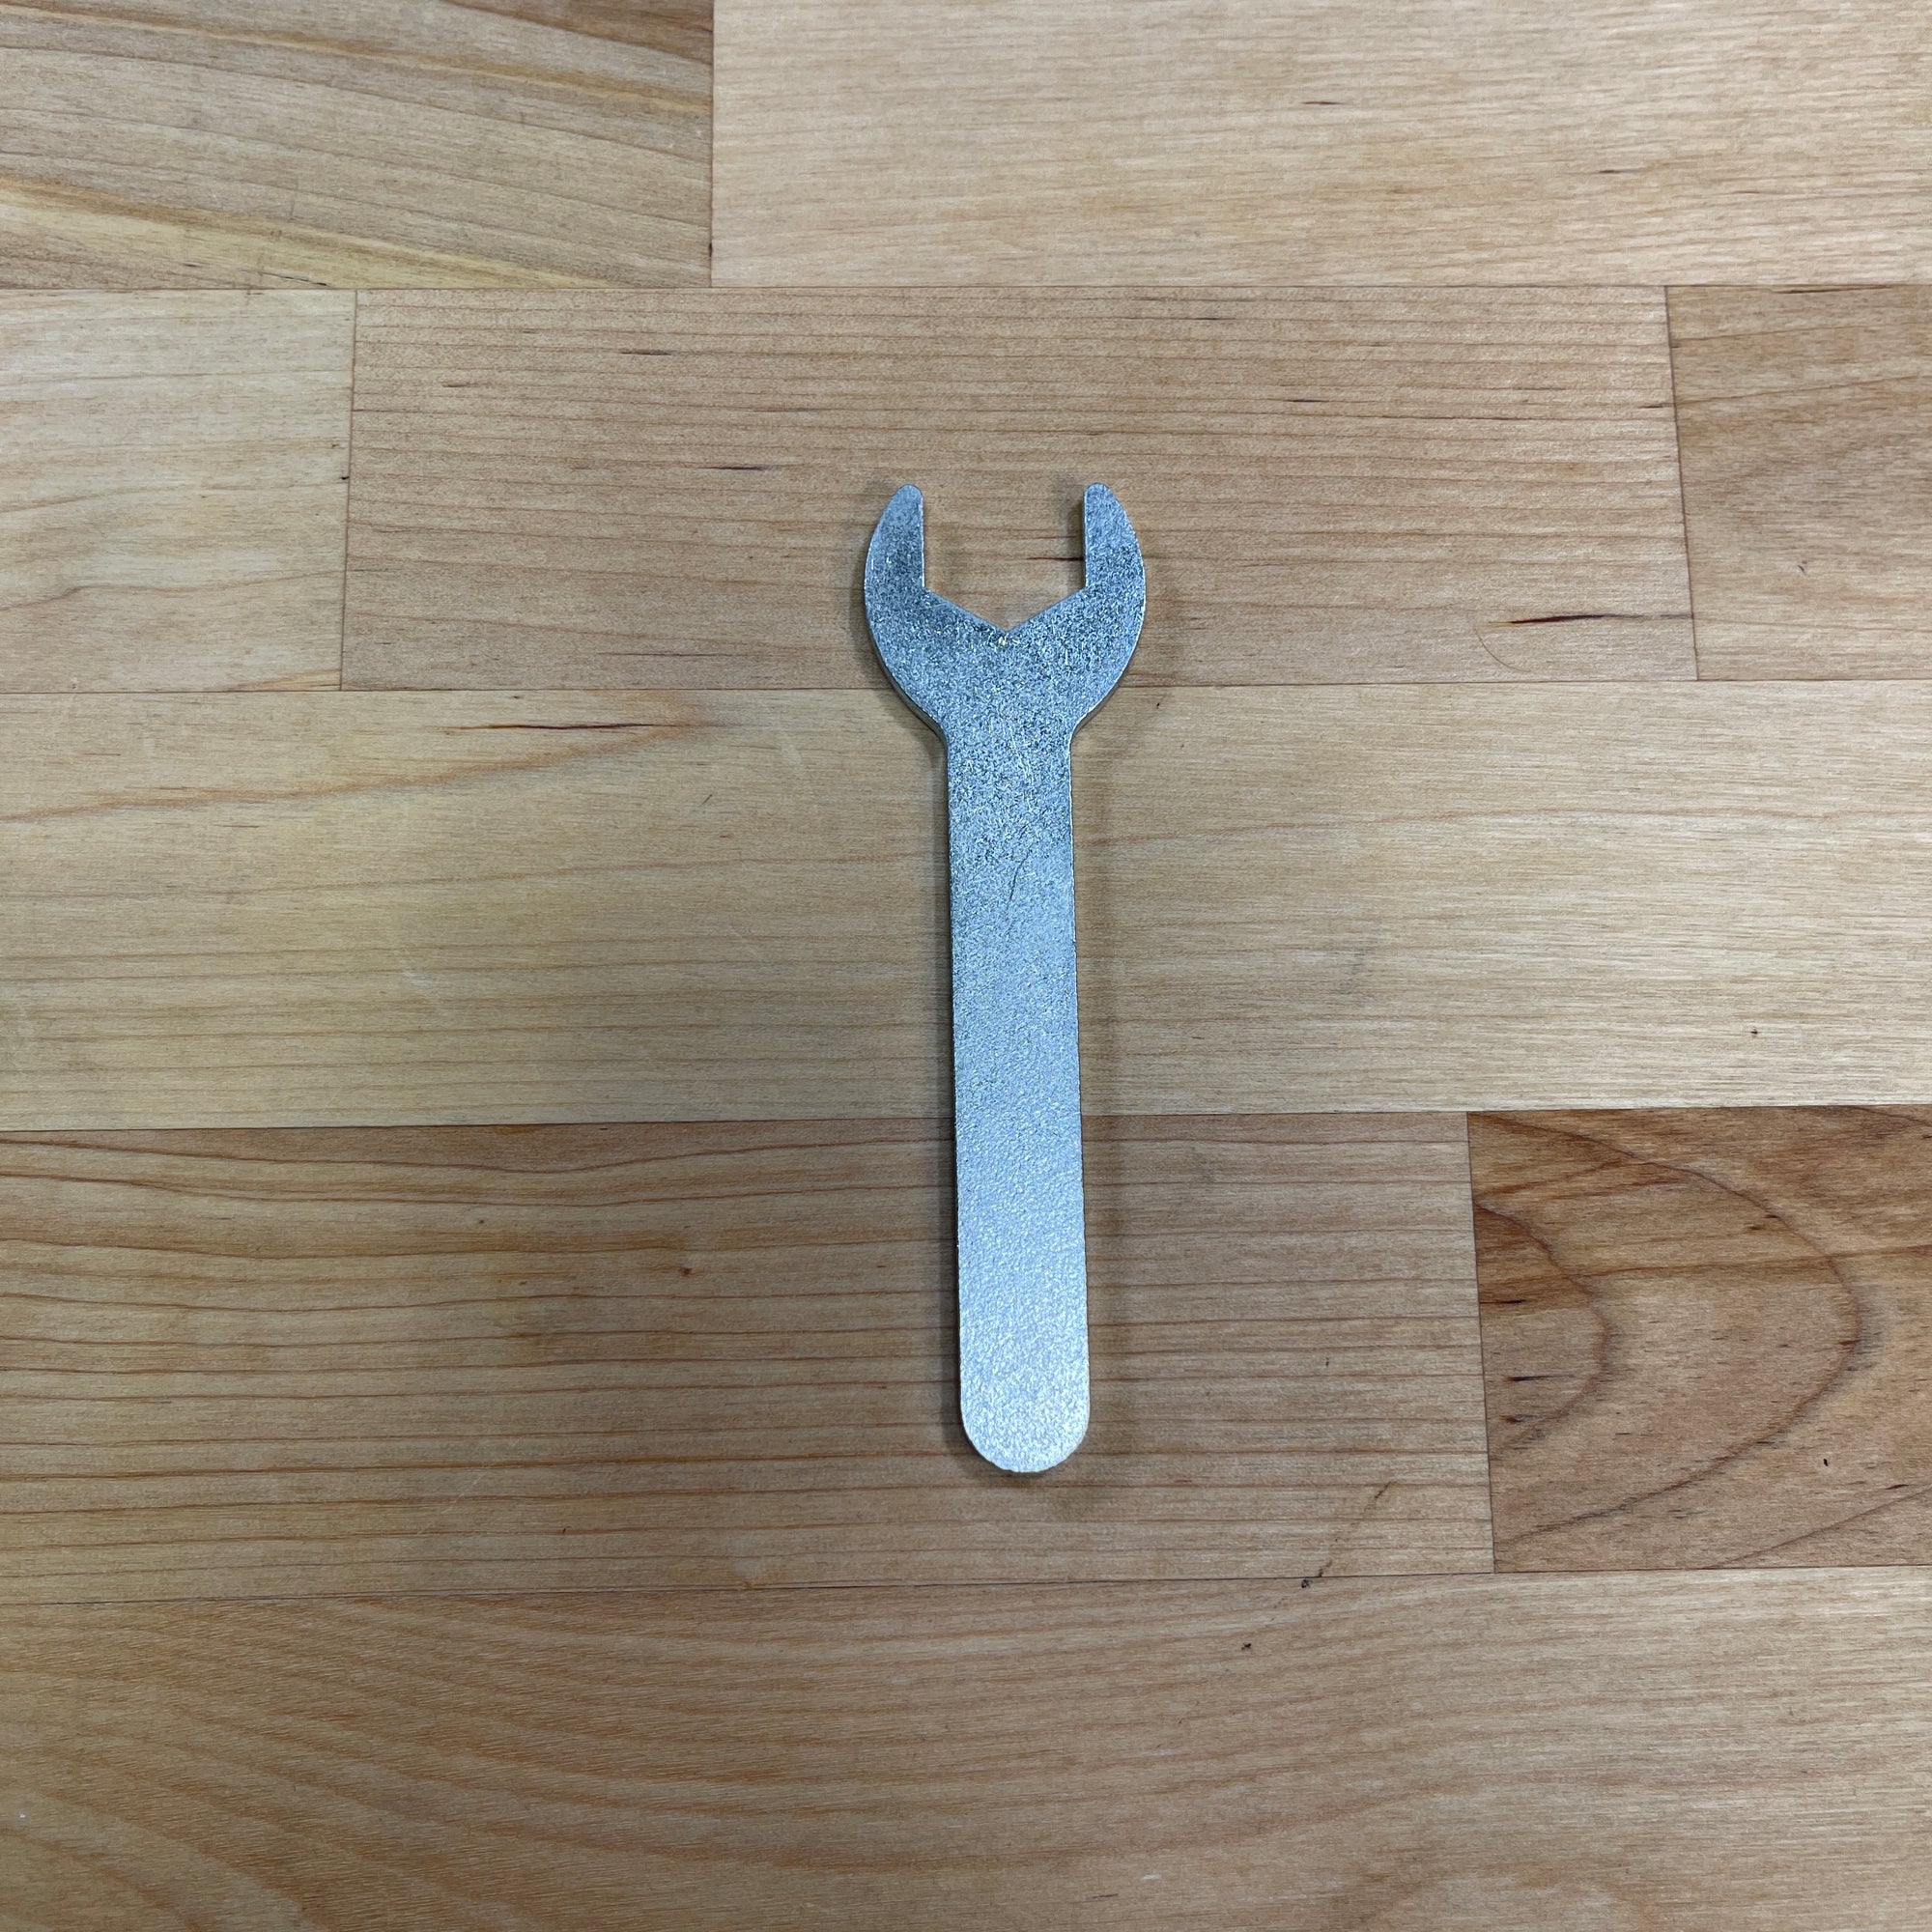 17mm Stainless Steel Wrench